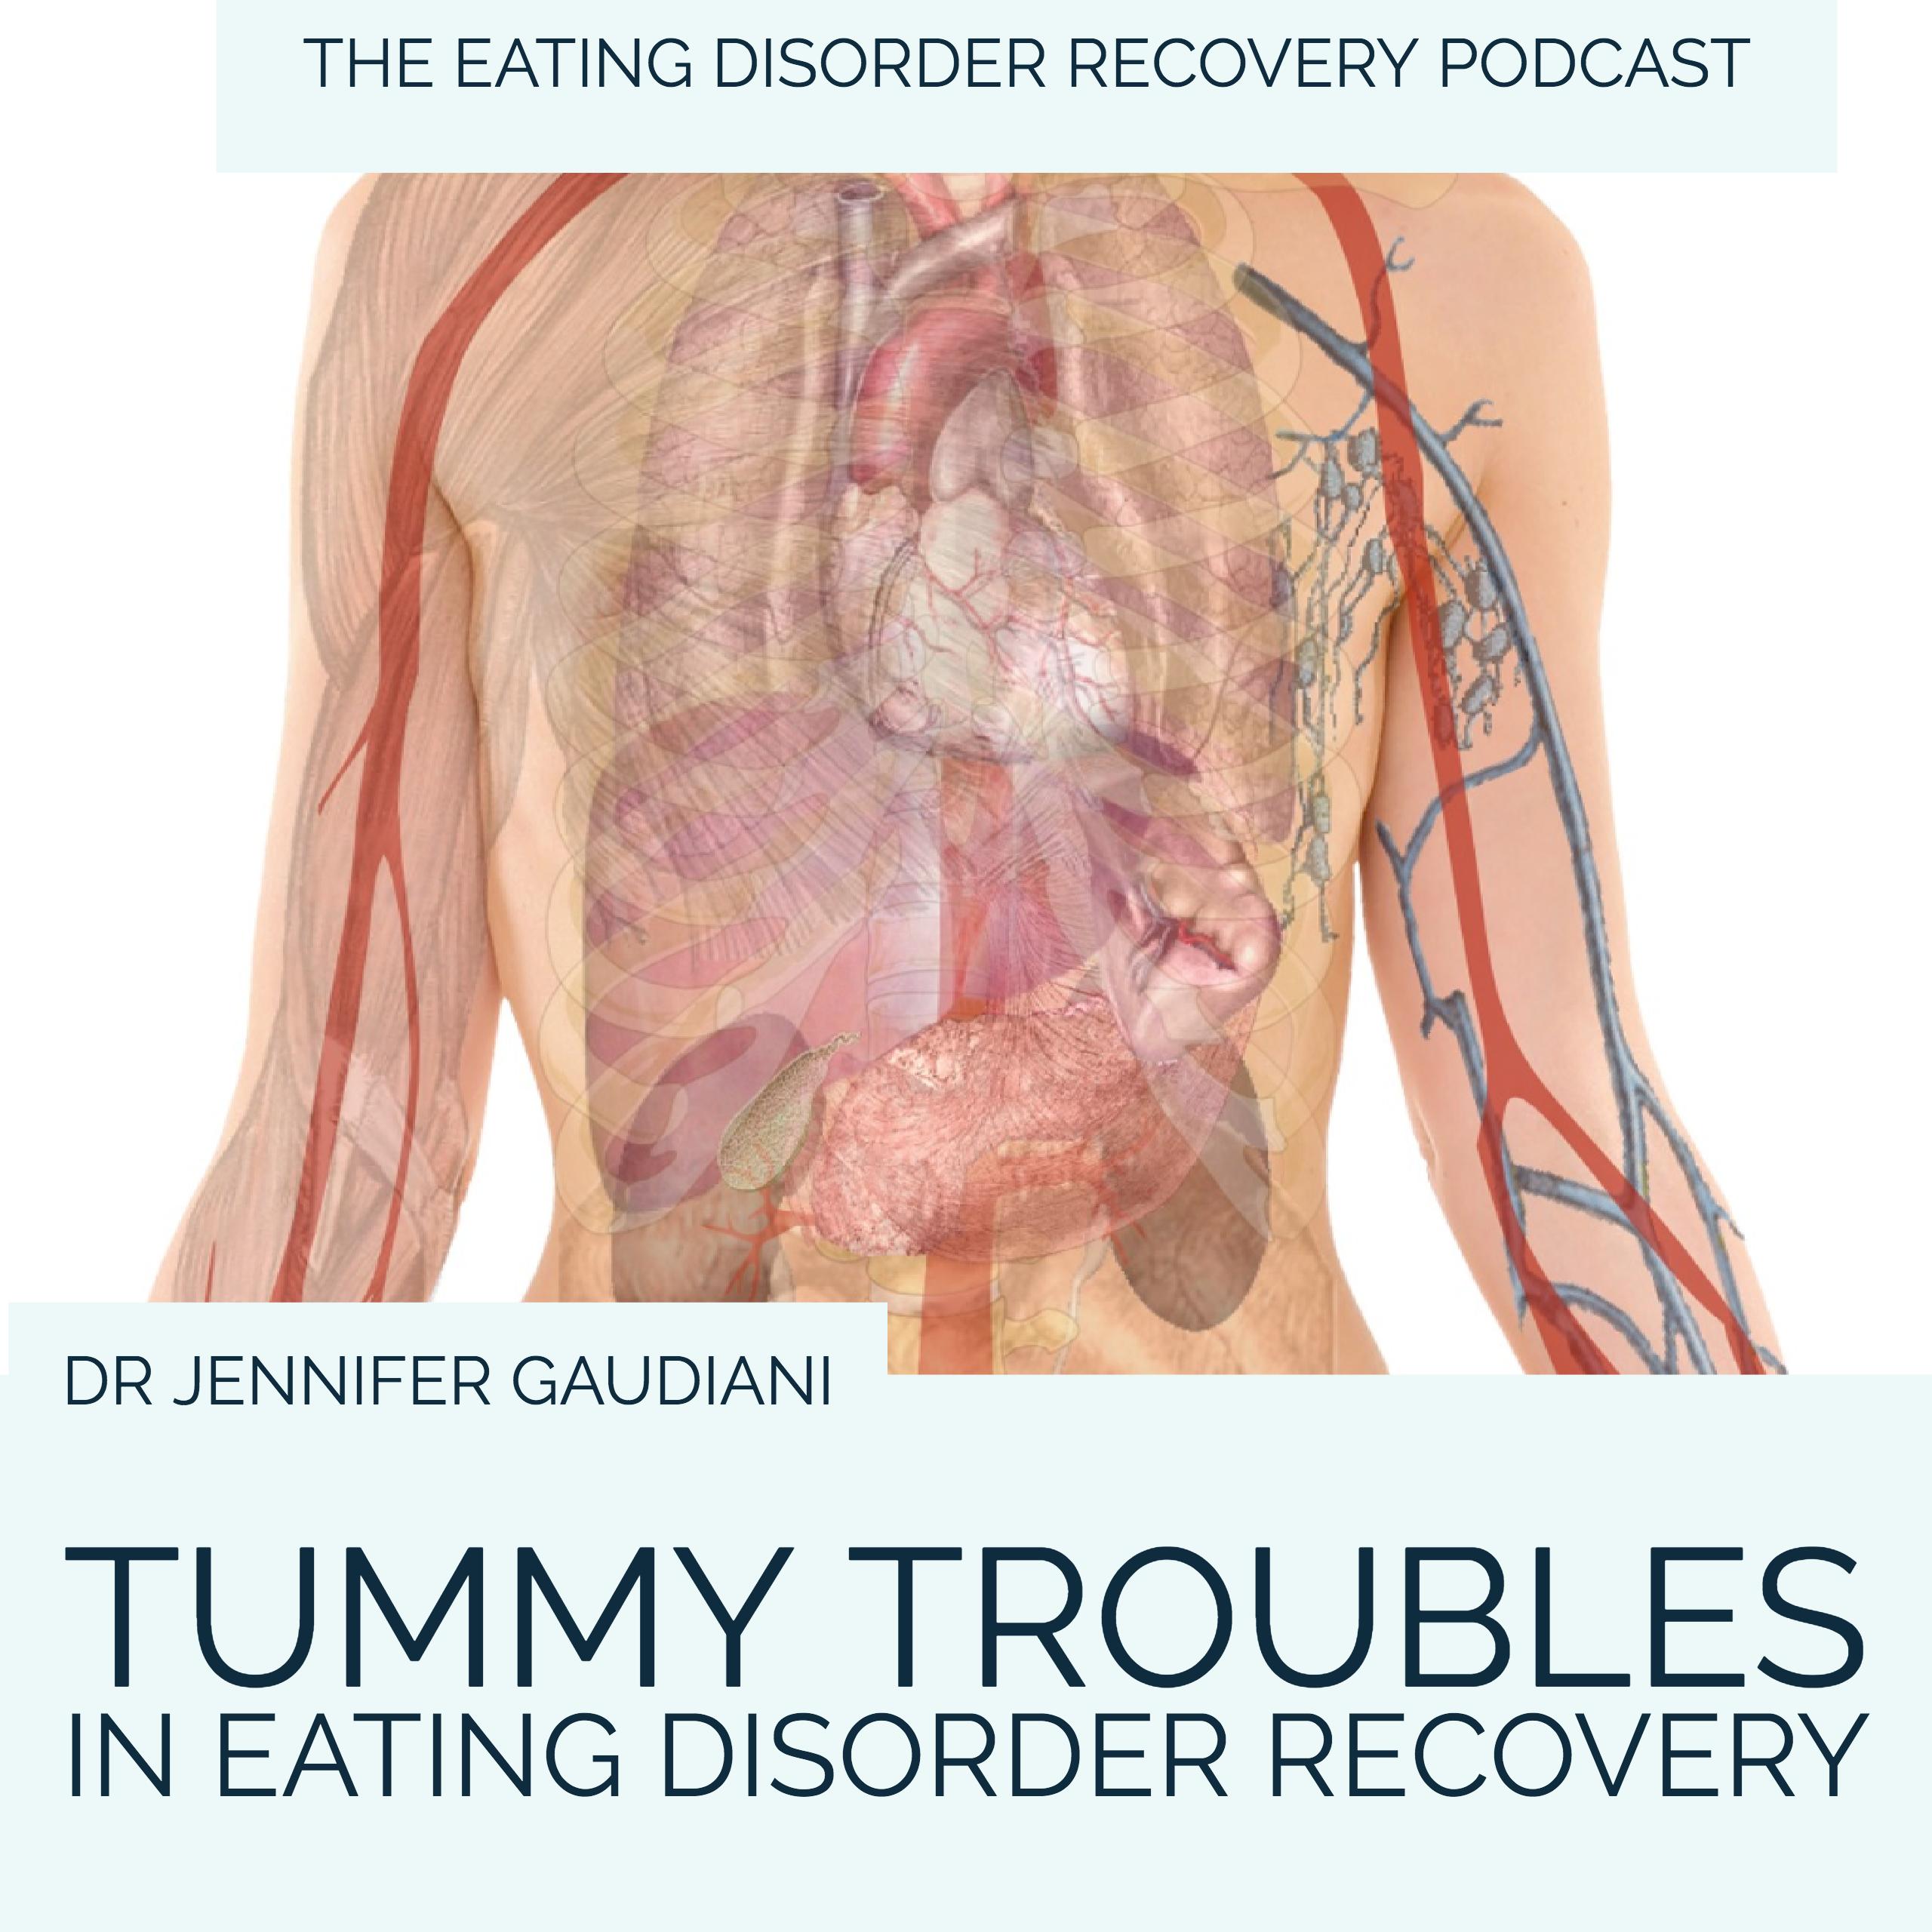 Dr G: Tummy Troubles in Eating Disorder Recovery